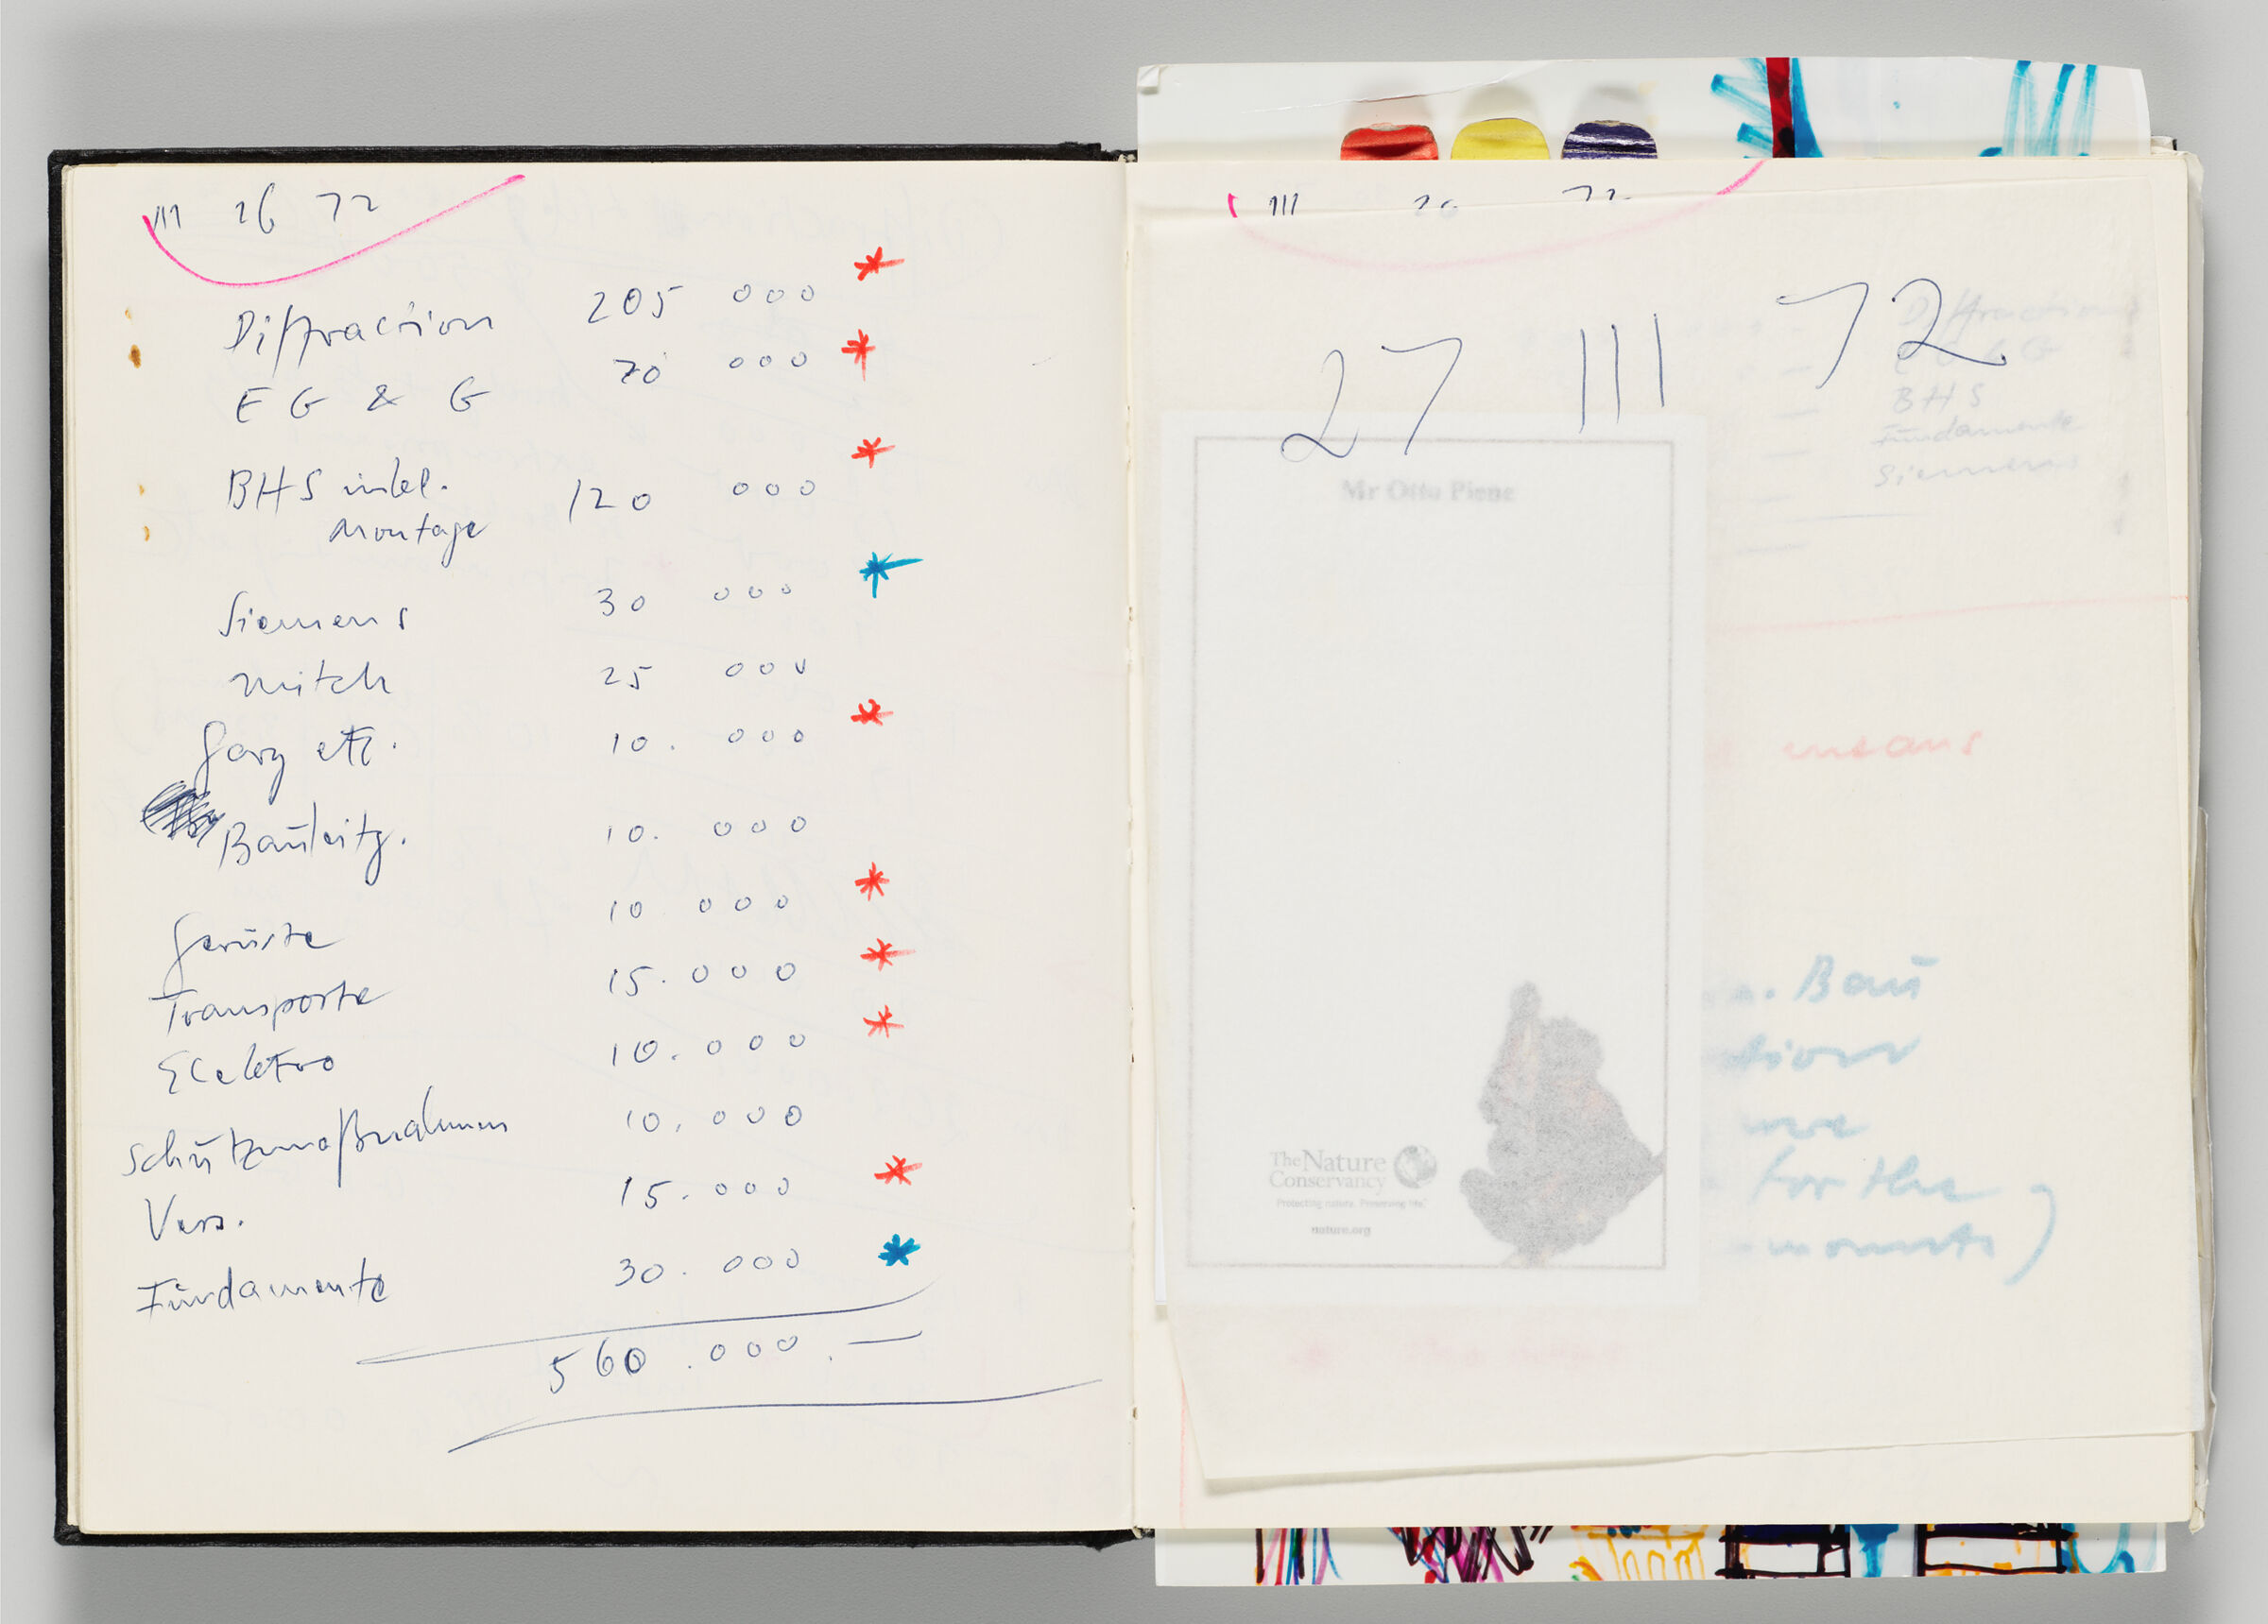 Untitled (Budget Calculations, Left Page); Untitled (Budget Calculations And Notes, Right Page)